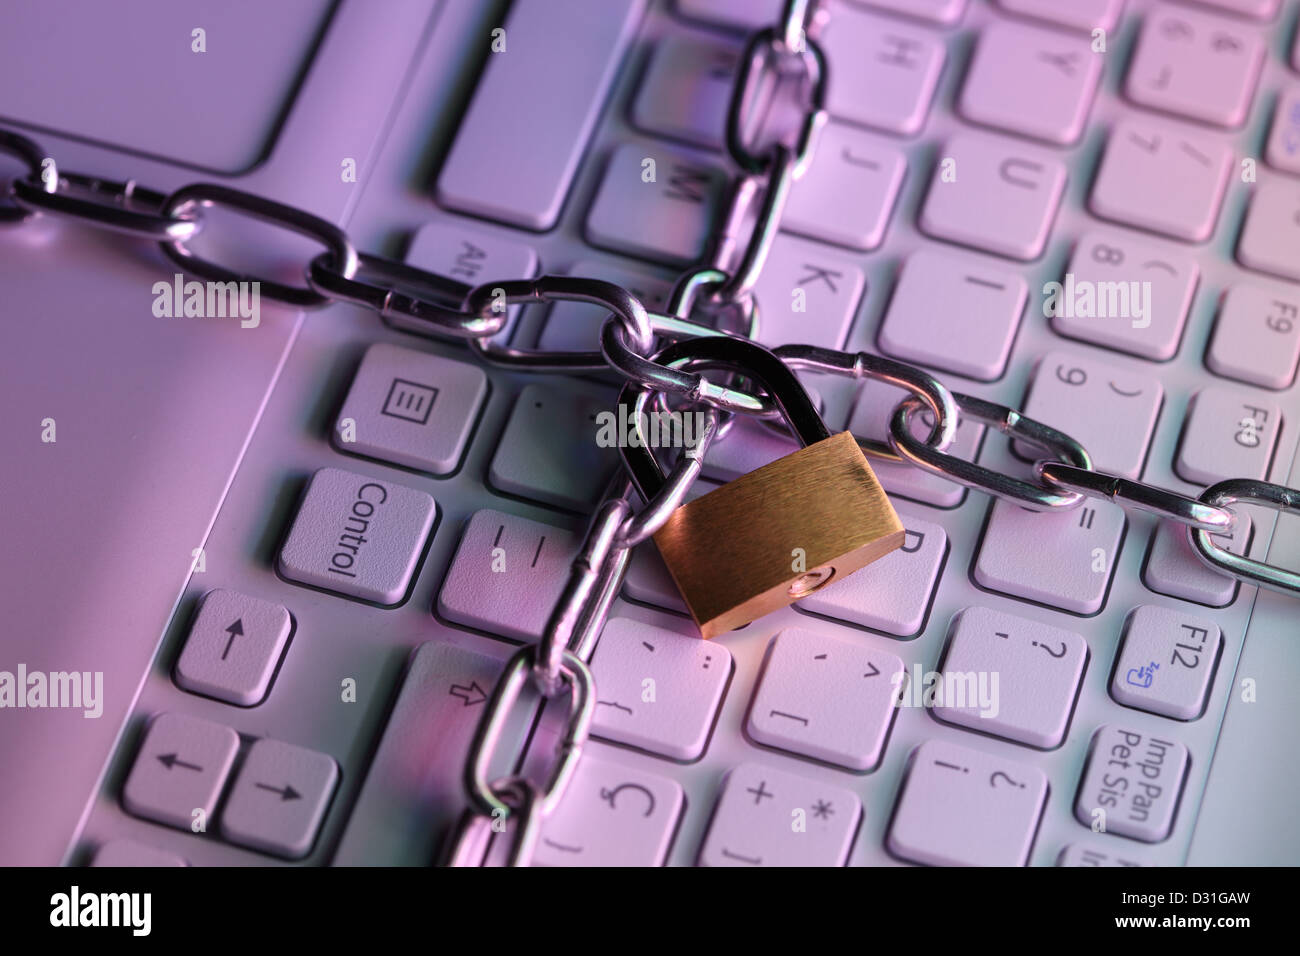 Laptop keyboard locked with a padlock. Computer security concept Stock Photo